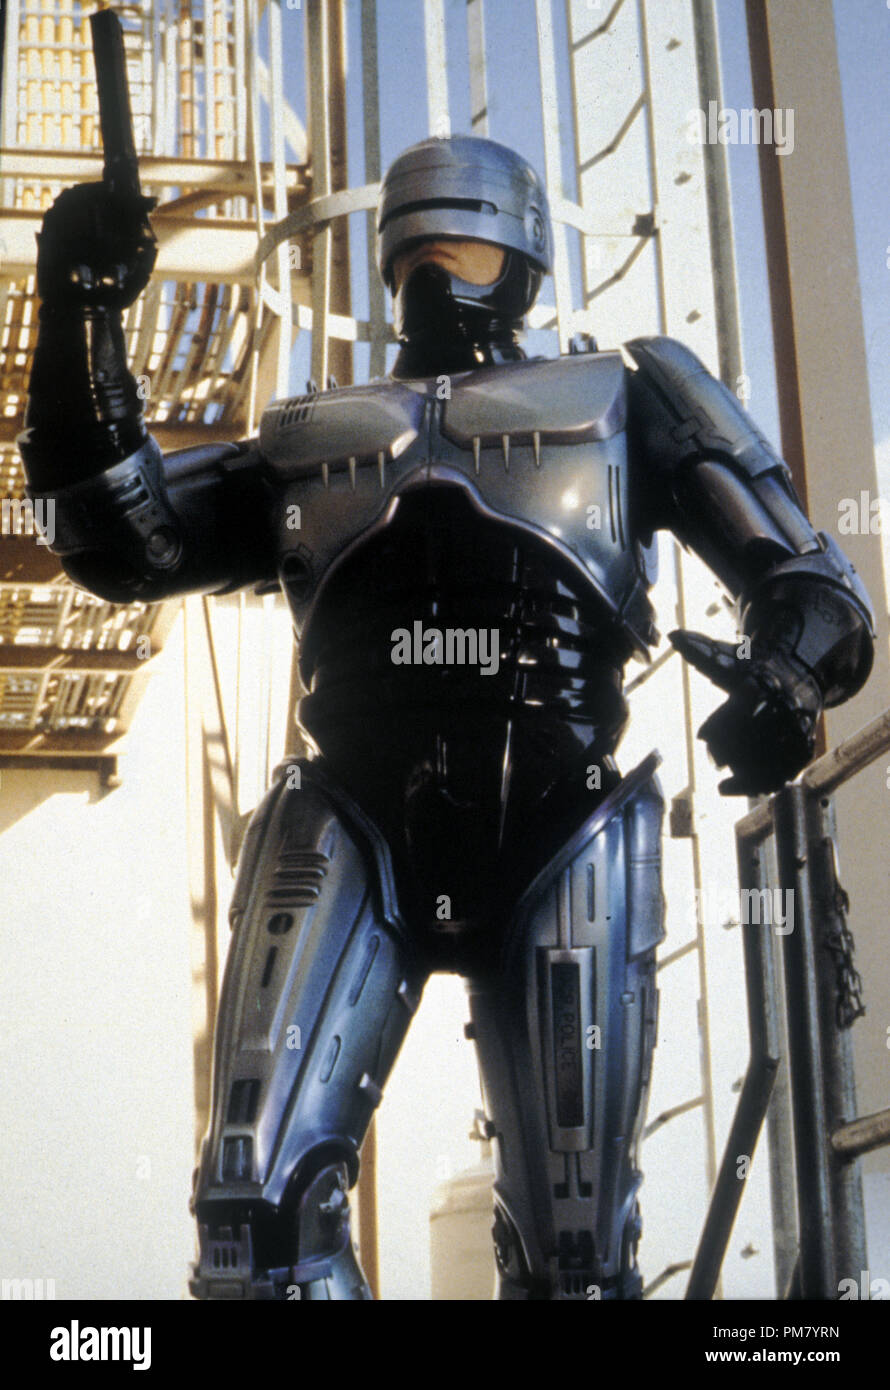 Film still or Publicity still from 'Robocop 2' Peter Weller © 1990 Orion All Rights Reserved   File Reference # 31571099THA  For Editorial Use Only Stock Photo